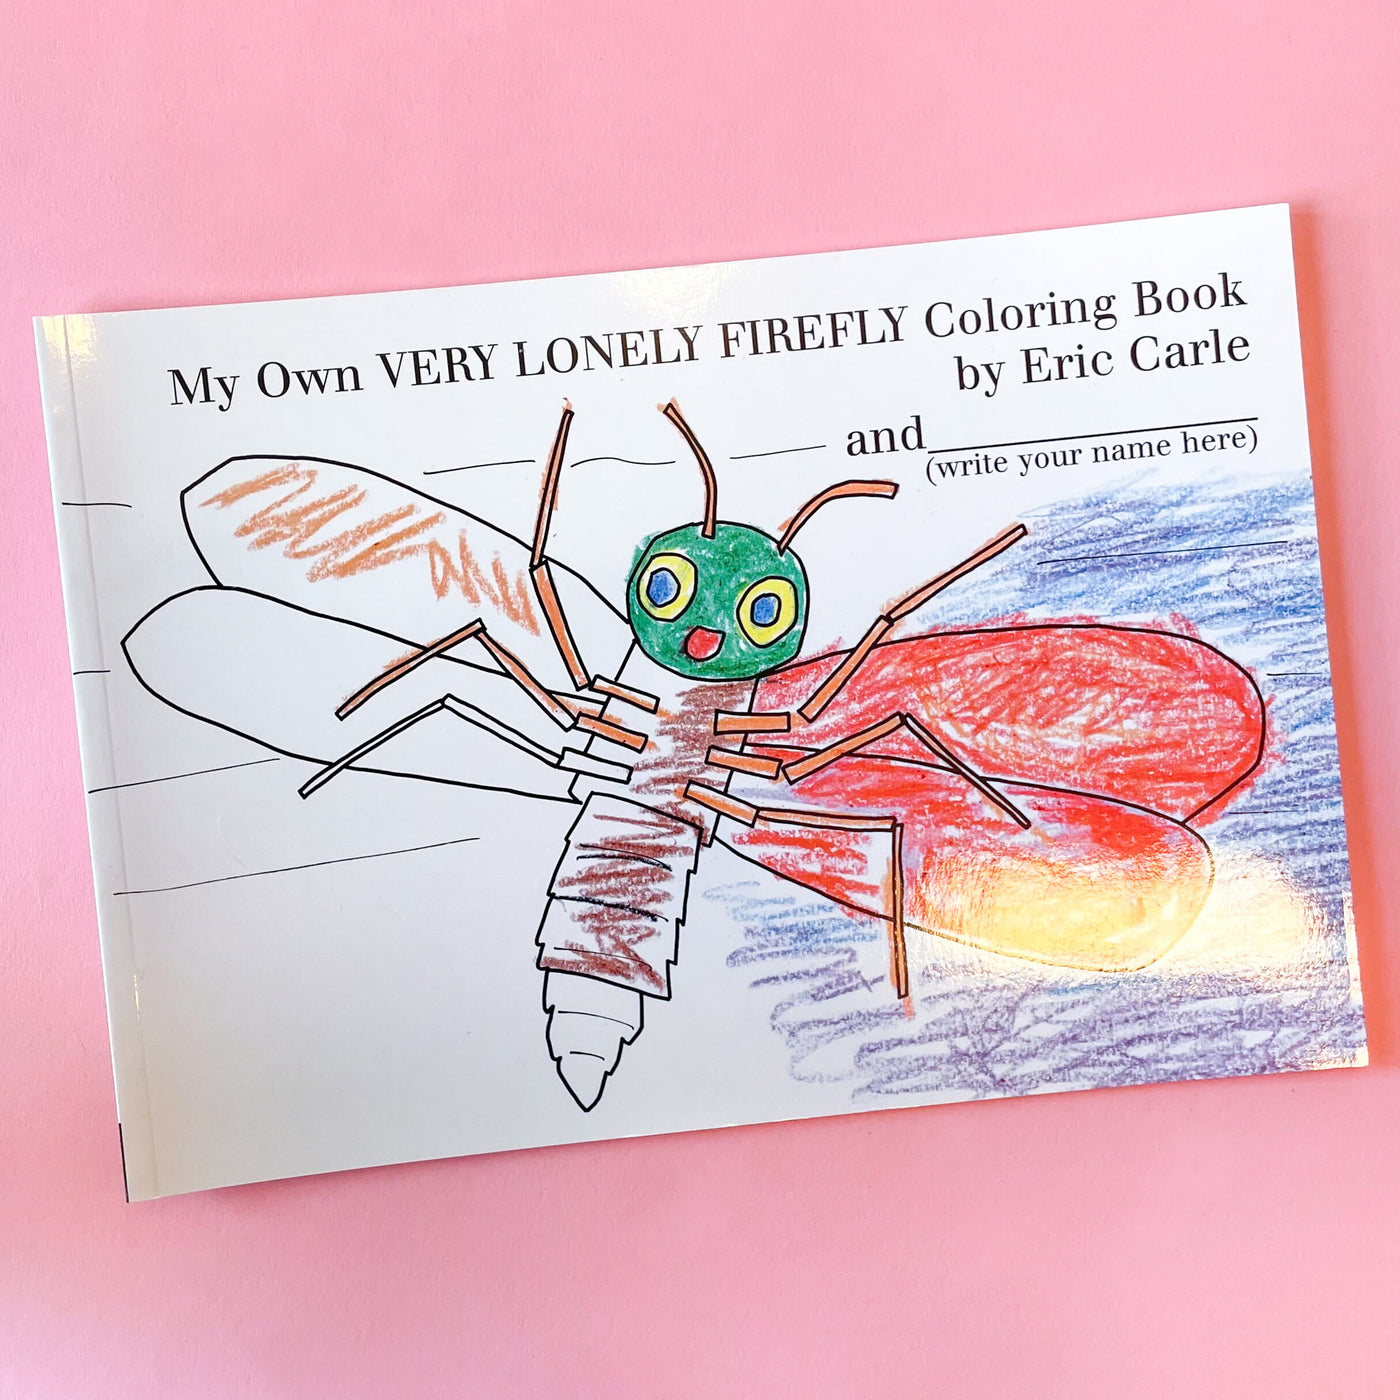 My Own Very Lonely Firefly Coloring Book By Eric Carle